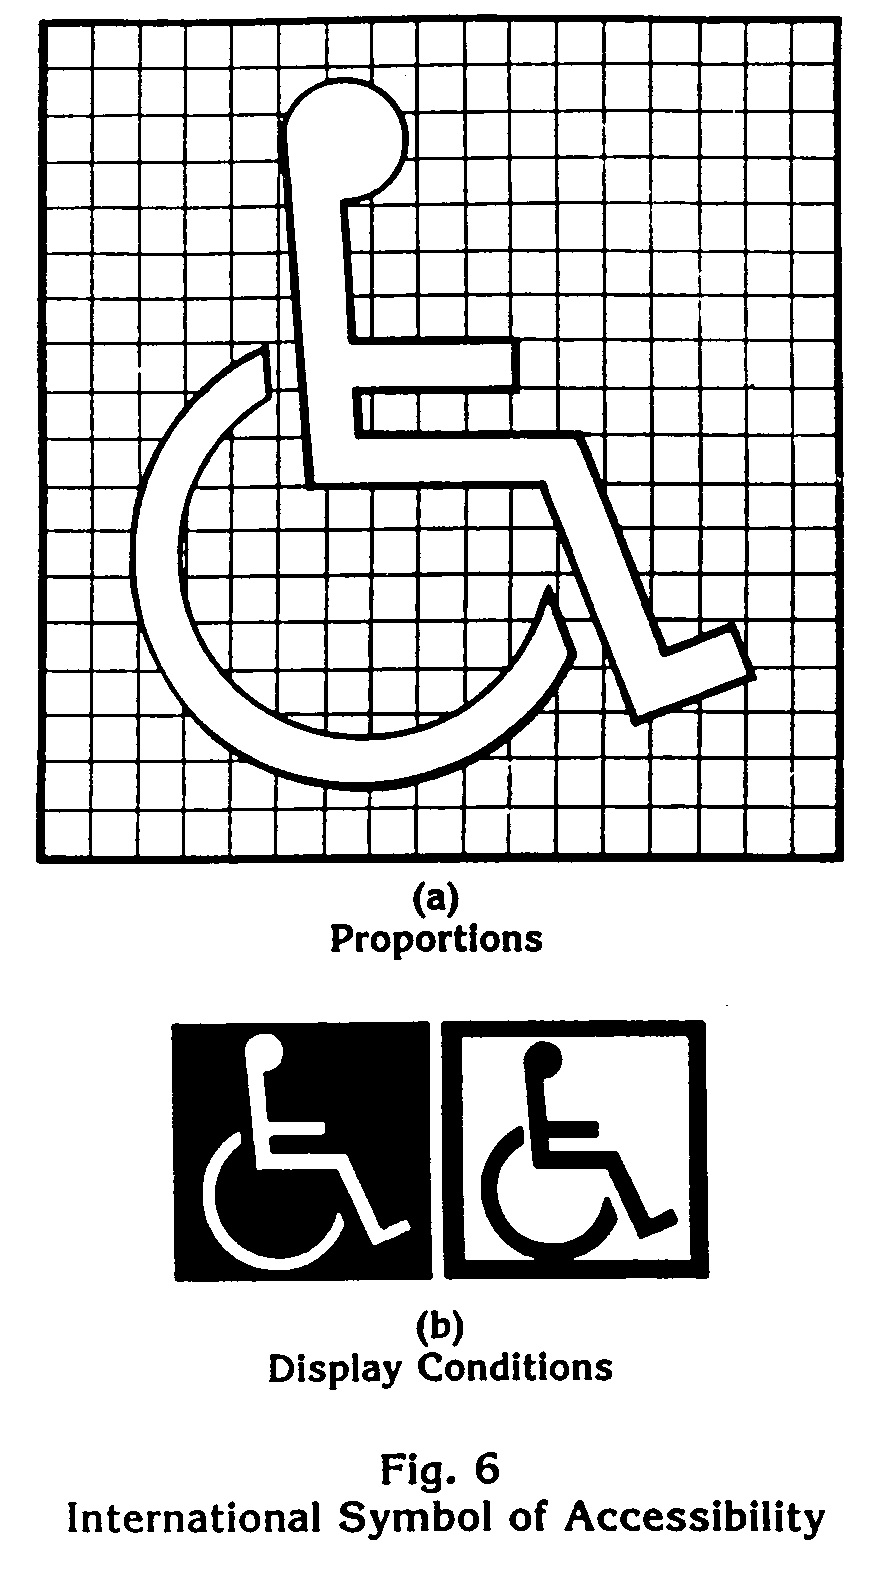 Diagrams of the International Symbol of Accessibility (ISA)